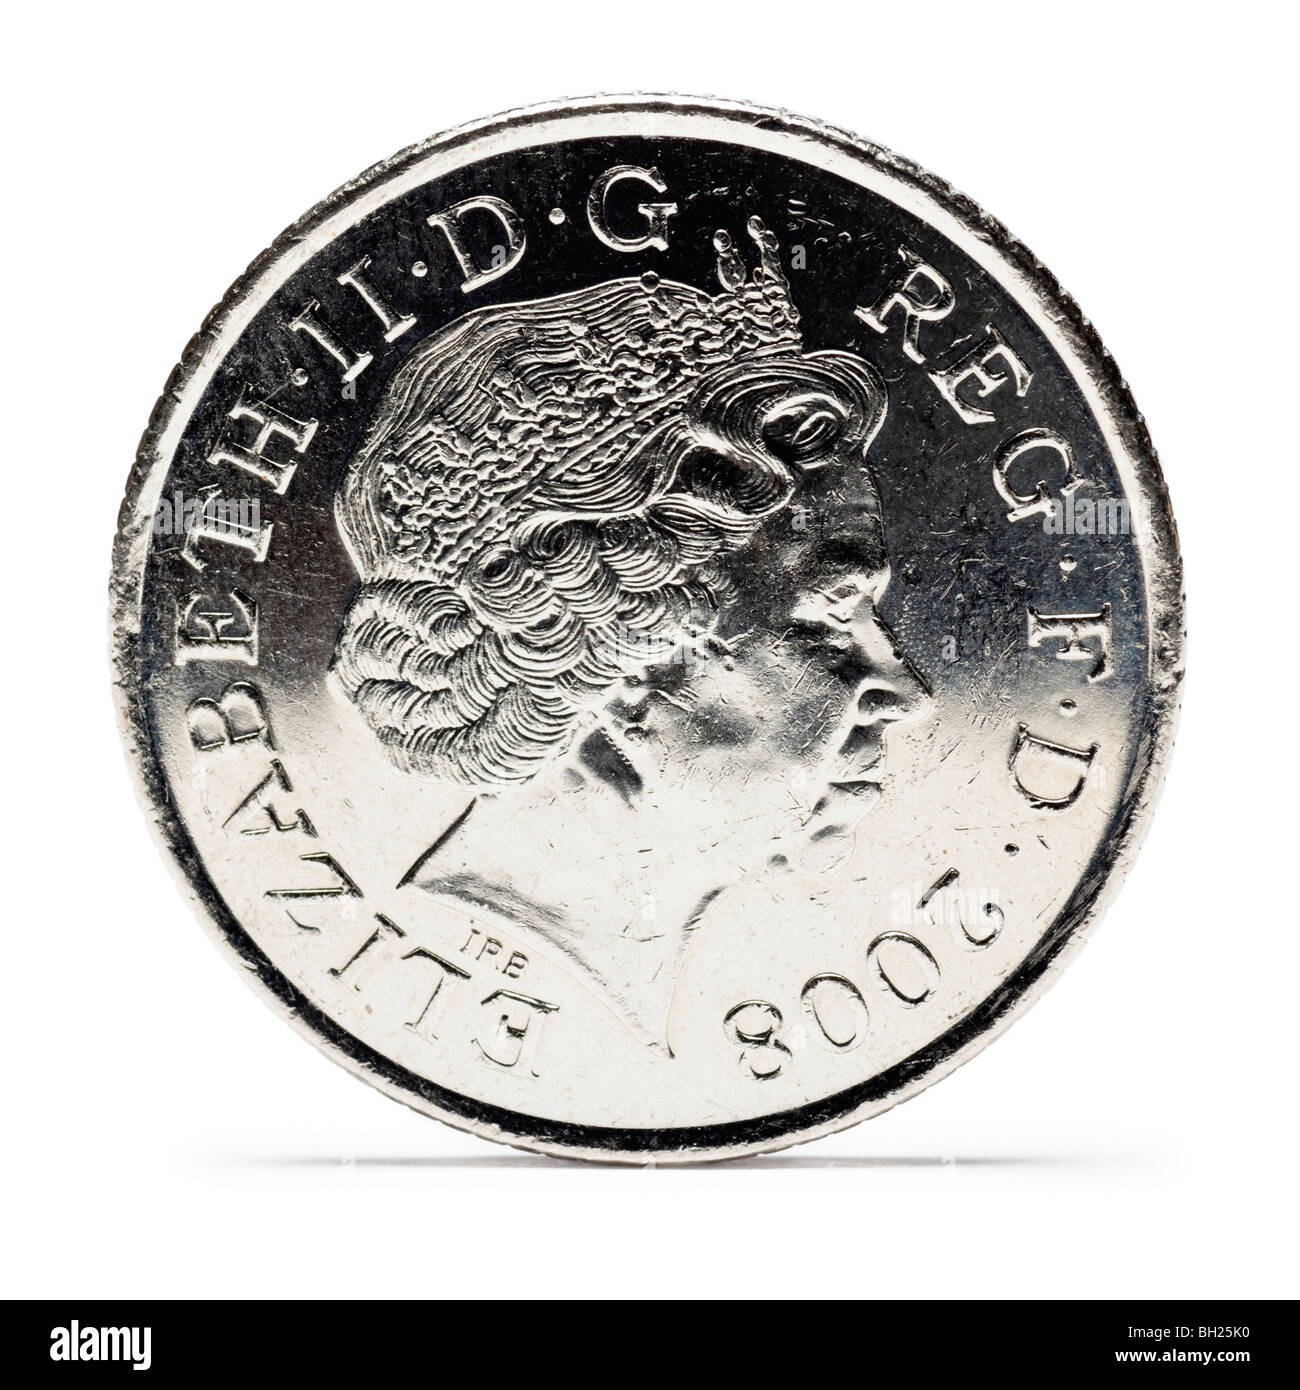 British Ten Pence coin front view Stock Photo